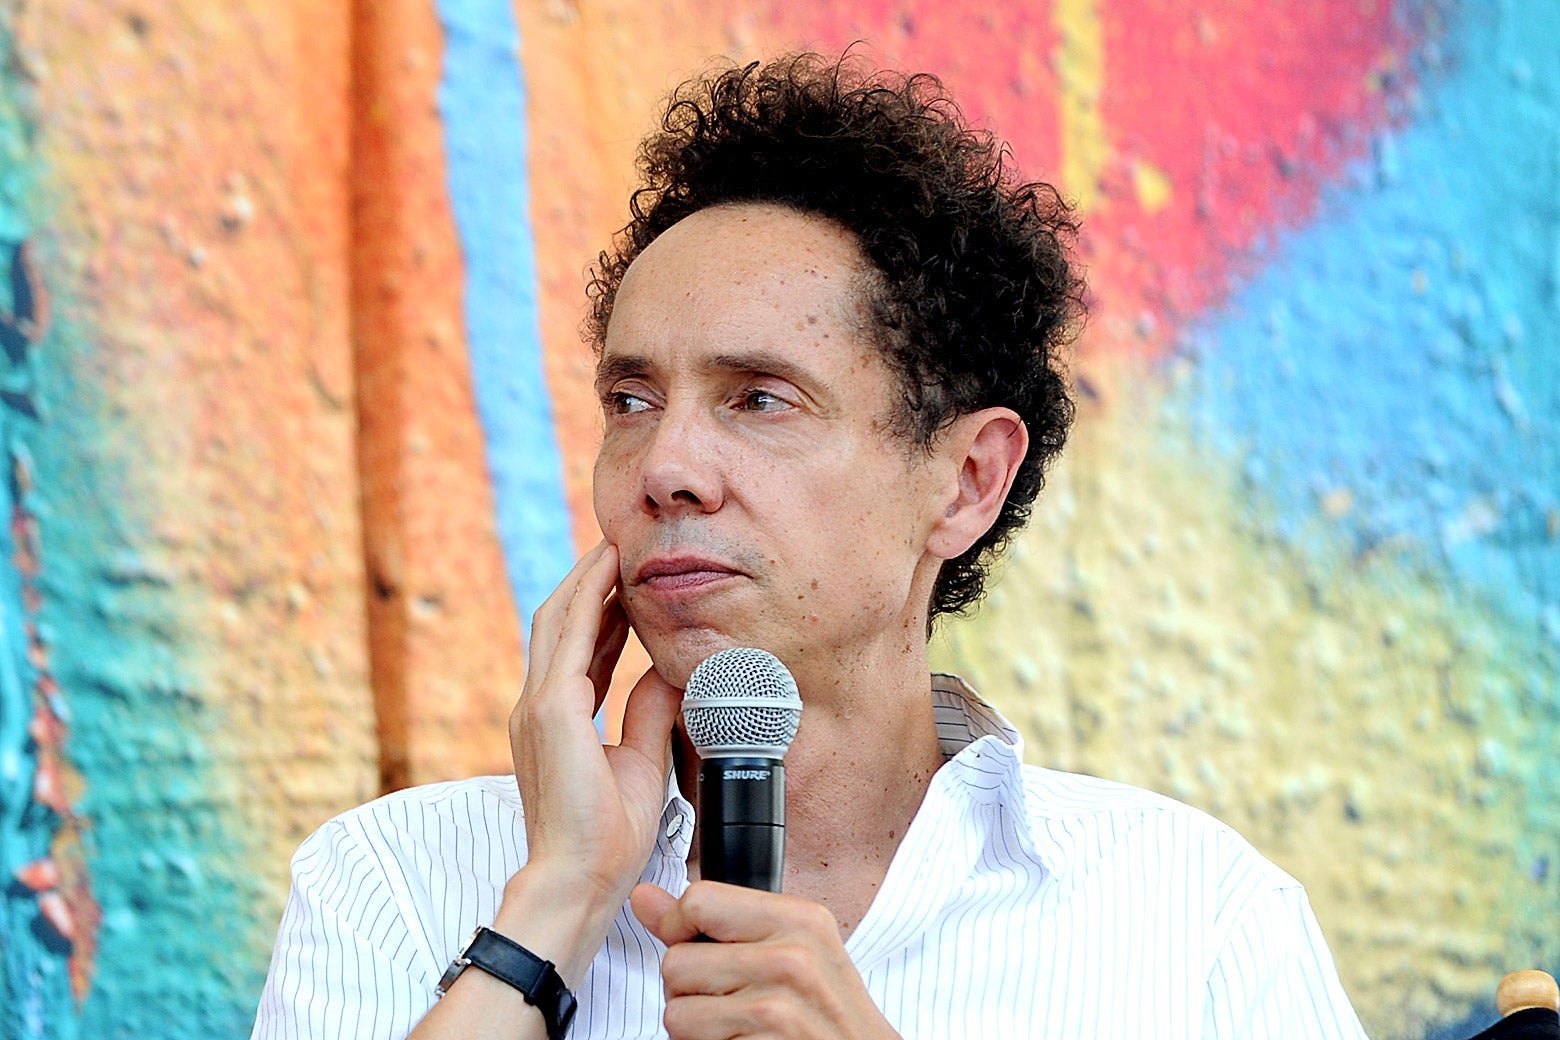 Malcolm Gladwell pondering a question while holding a microphone.